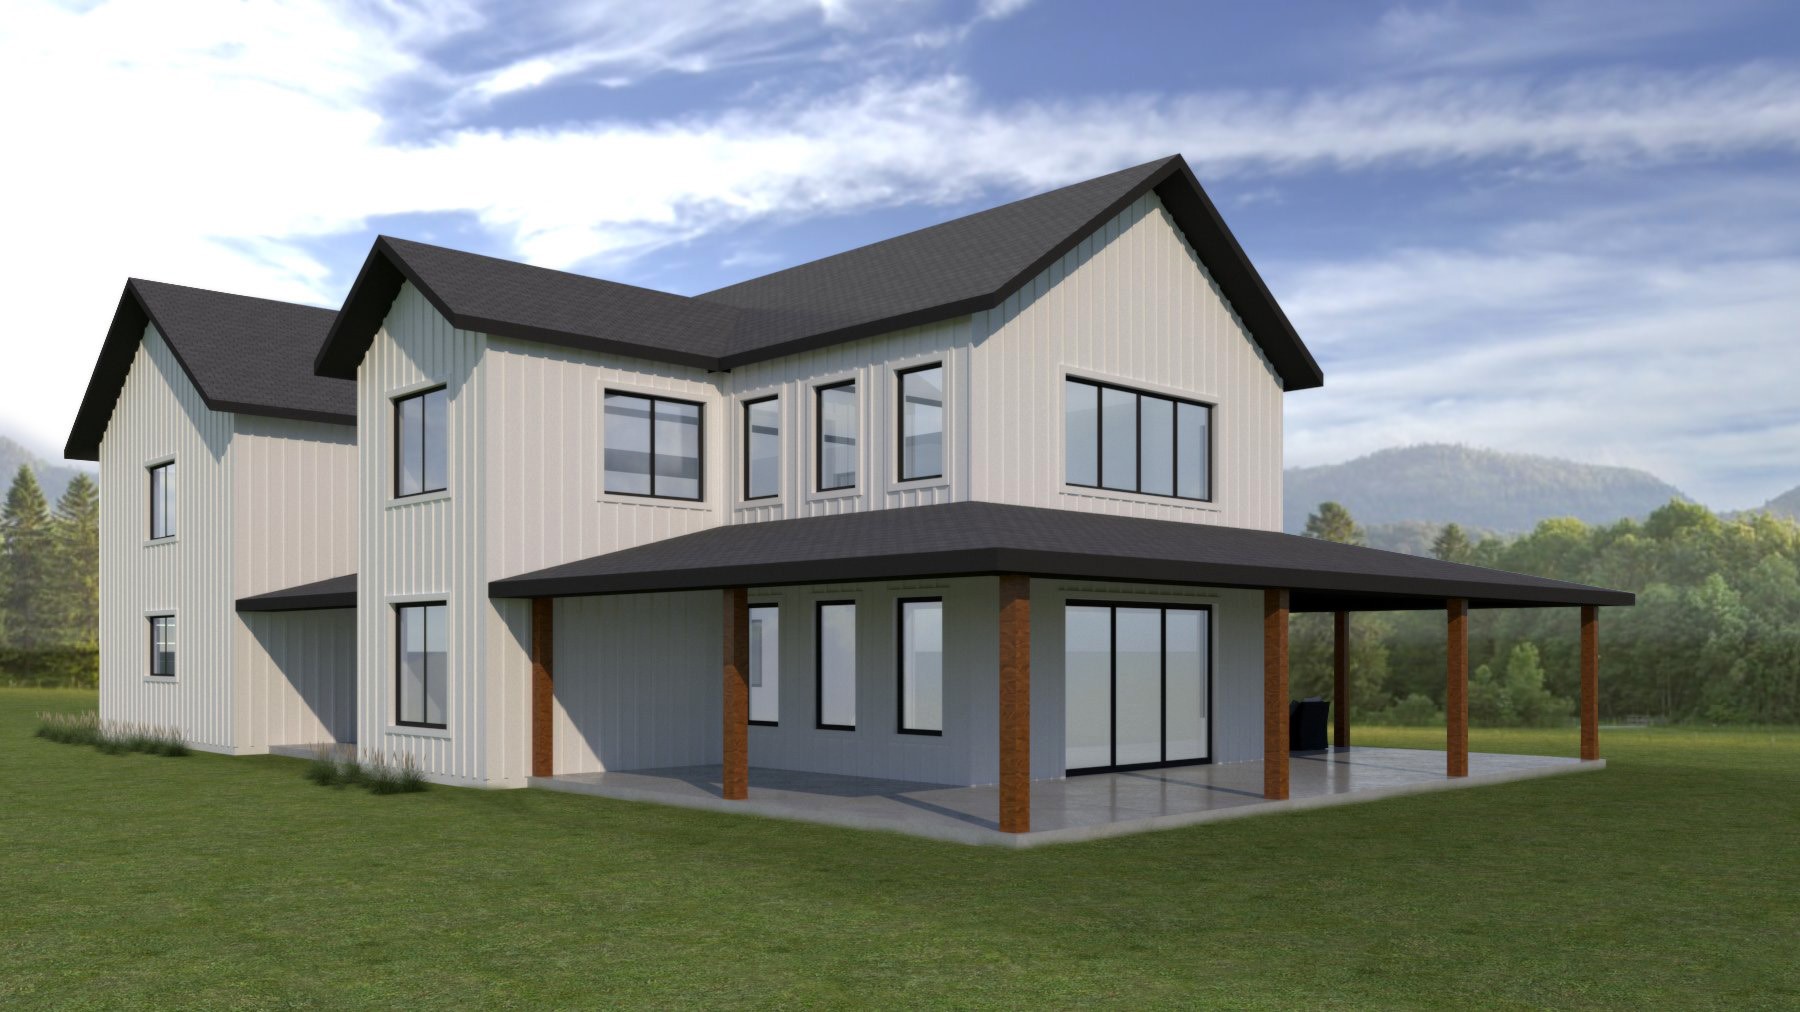 2024 Completion. To be built custom 4BR/4.5BA 3,955 SF home with bonus room above oversized two car garage. Situated on level 1.78 acre parcel in the new Lazy River Ranch community of Whitefish.  Located only 8 minutes from Downtown Whitefish the community offers over 17 acres of open space, and Stillwater river access. Whitefish Trail System is less than 5 min away. Call Kristin Zuckerman (406) 291-0778 or your real estate professional today.